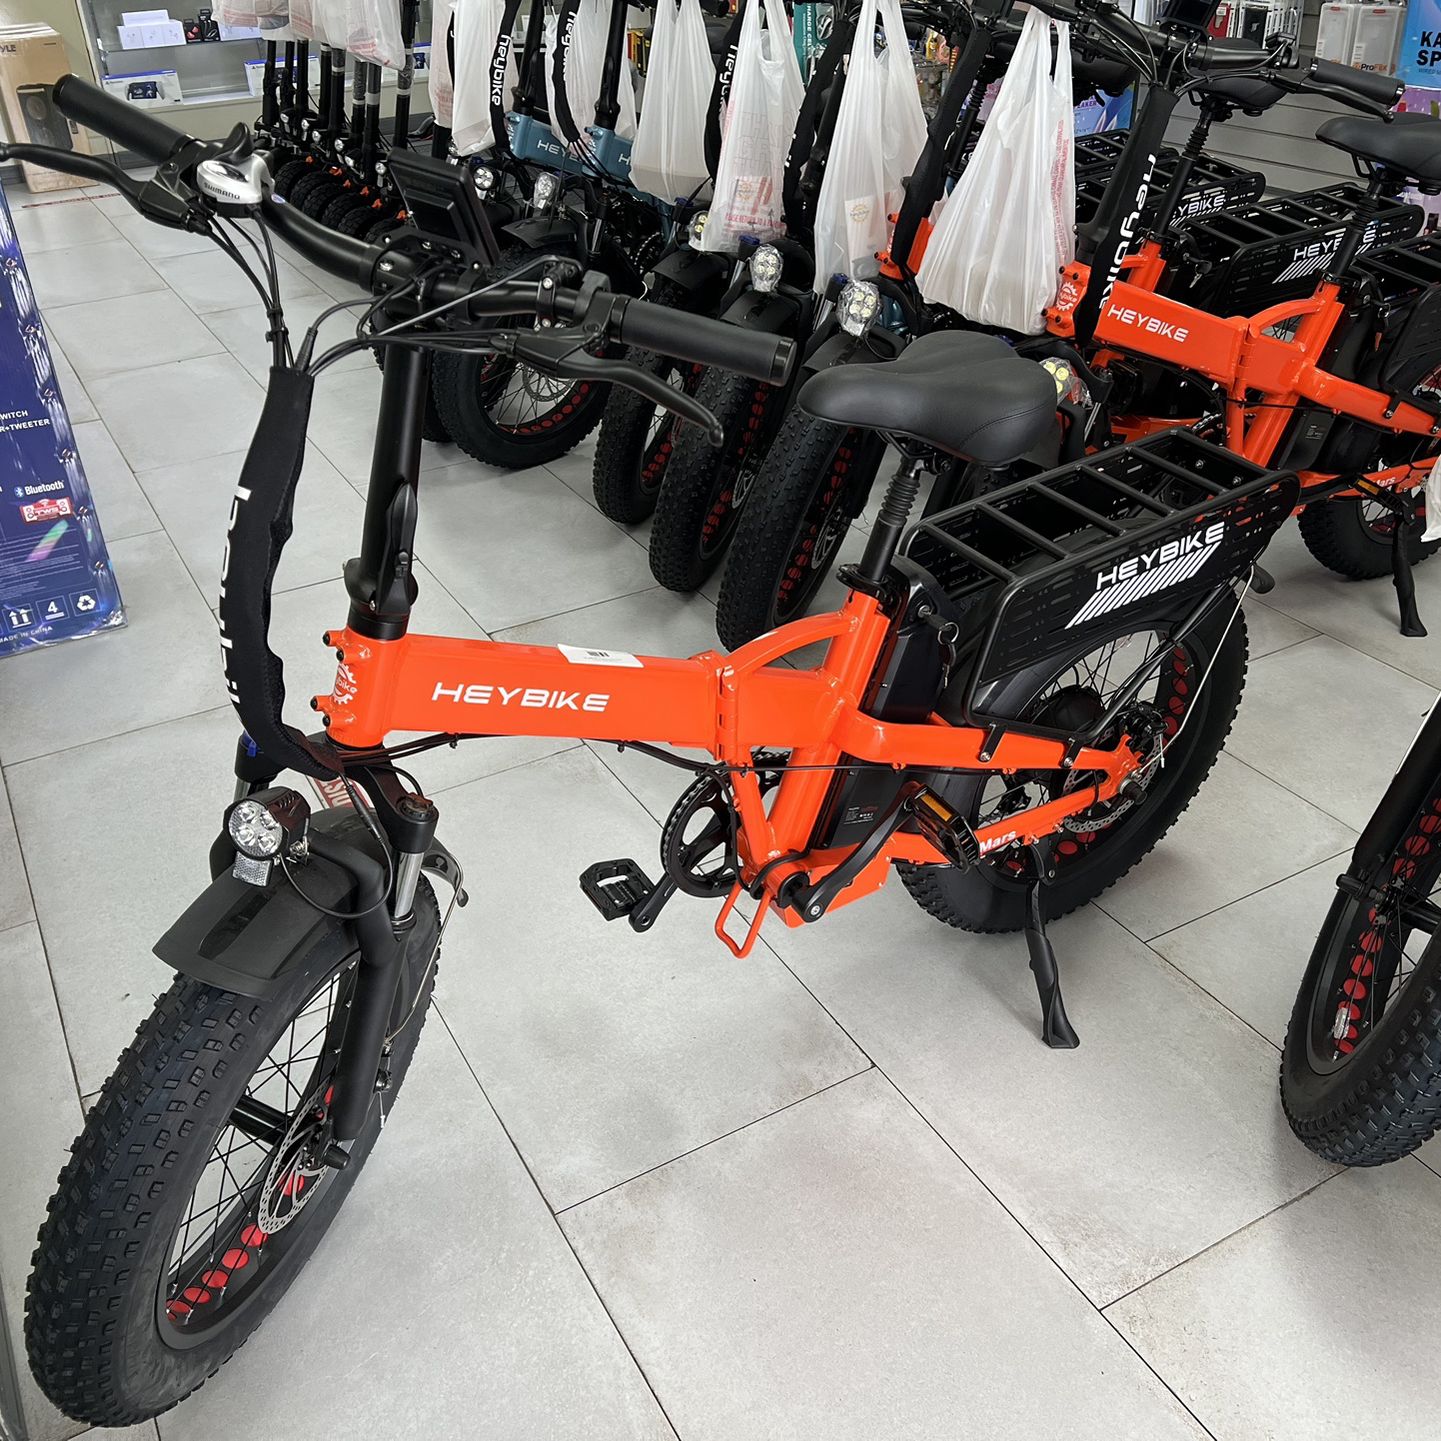 HeyBike Electric Bicycle 750watts 28mph! Finance For $50 Down Payment!!